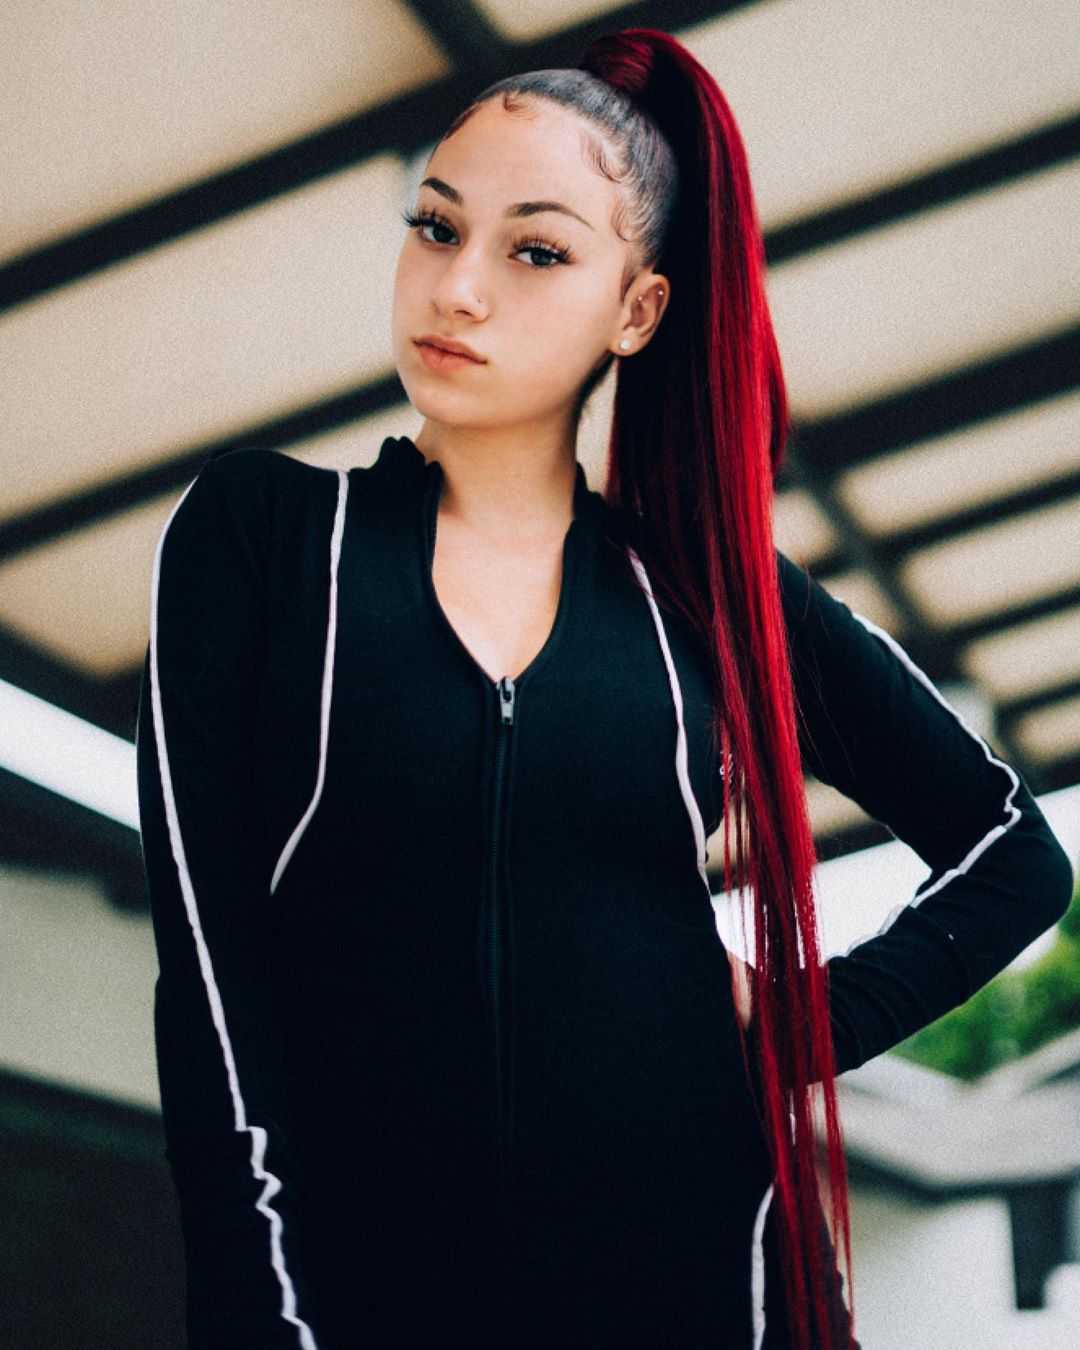 70+ Hot Pictures Of Danielle Bregoli aka Bhad Bhabie Which Will Win Your Heart 55